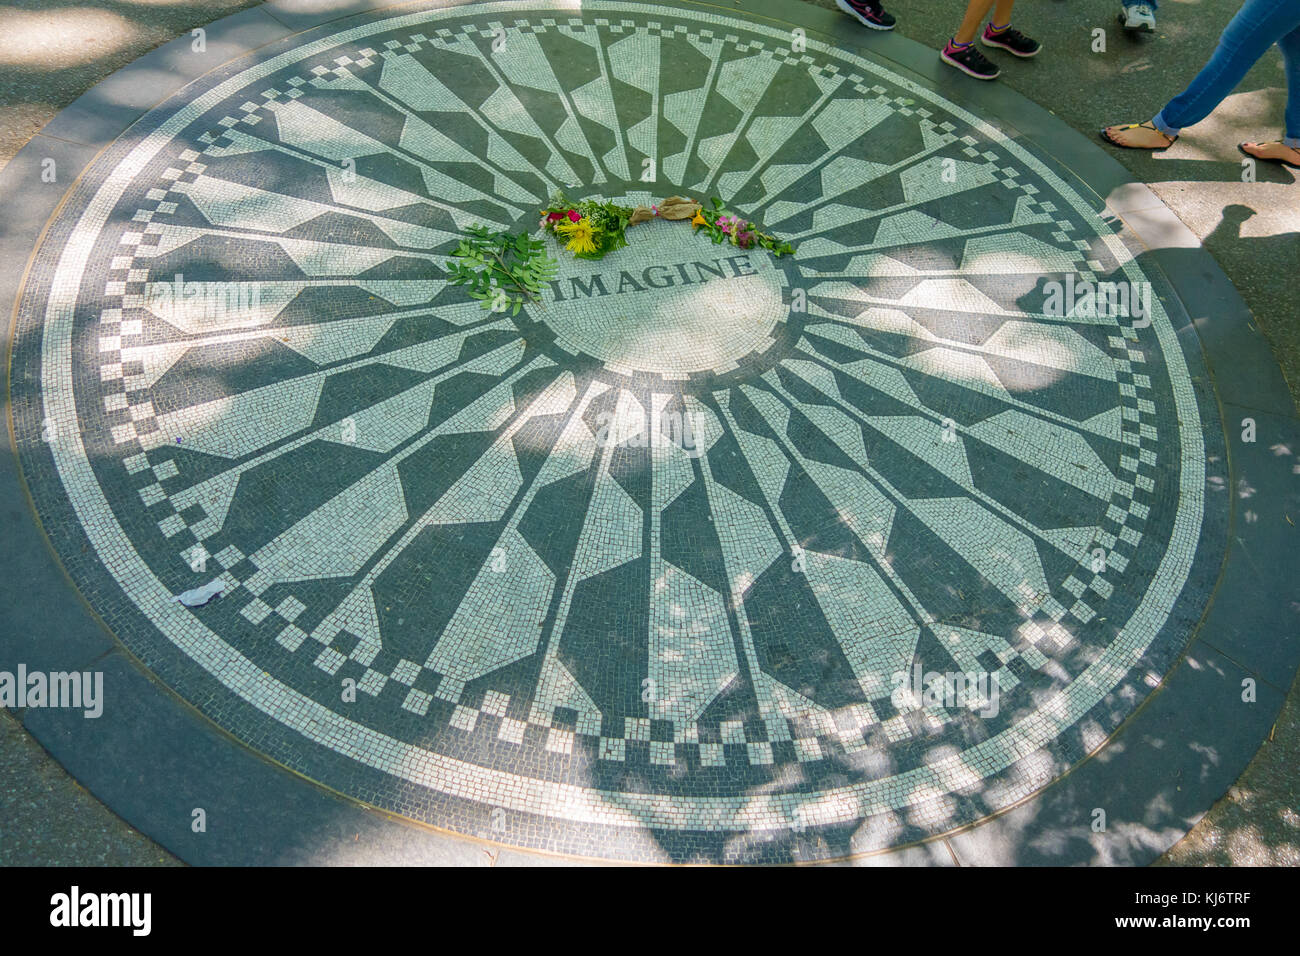 NEW YORK, USA - NOVEMBER 22, 2016: Strawberry Fields mosaic in the floor of Central park in New York City, USA Stock Photo